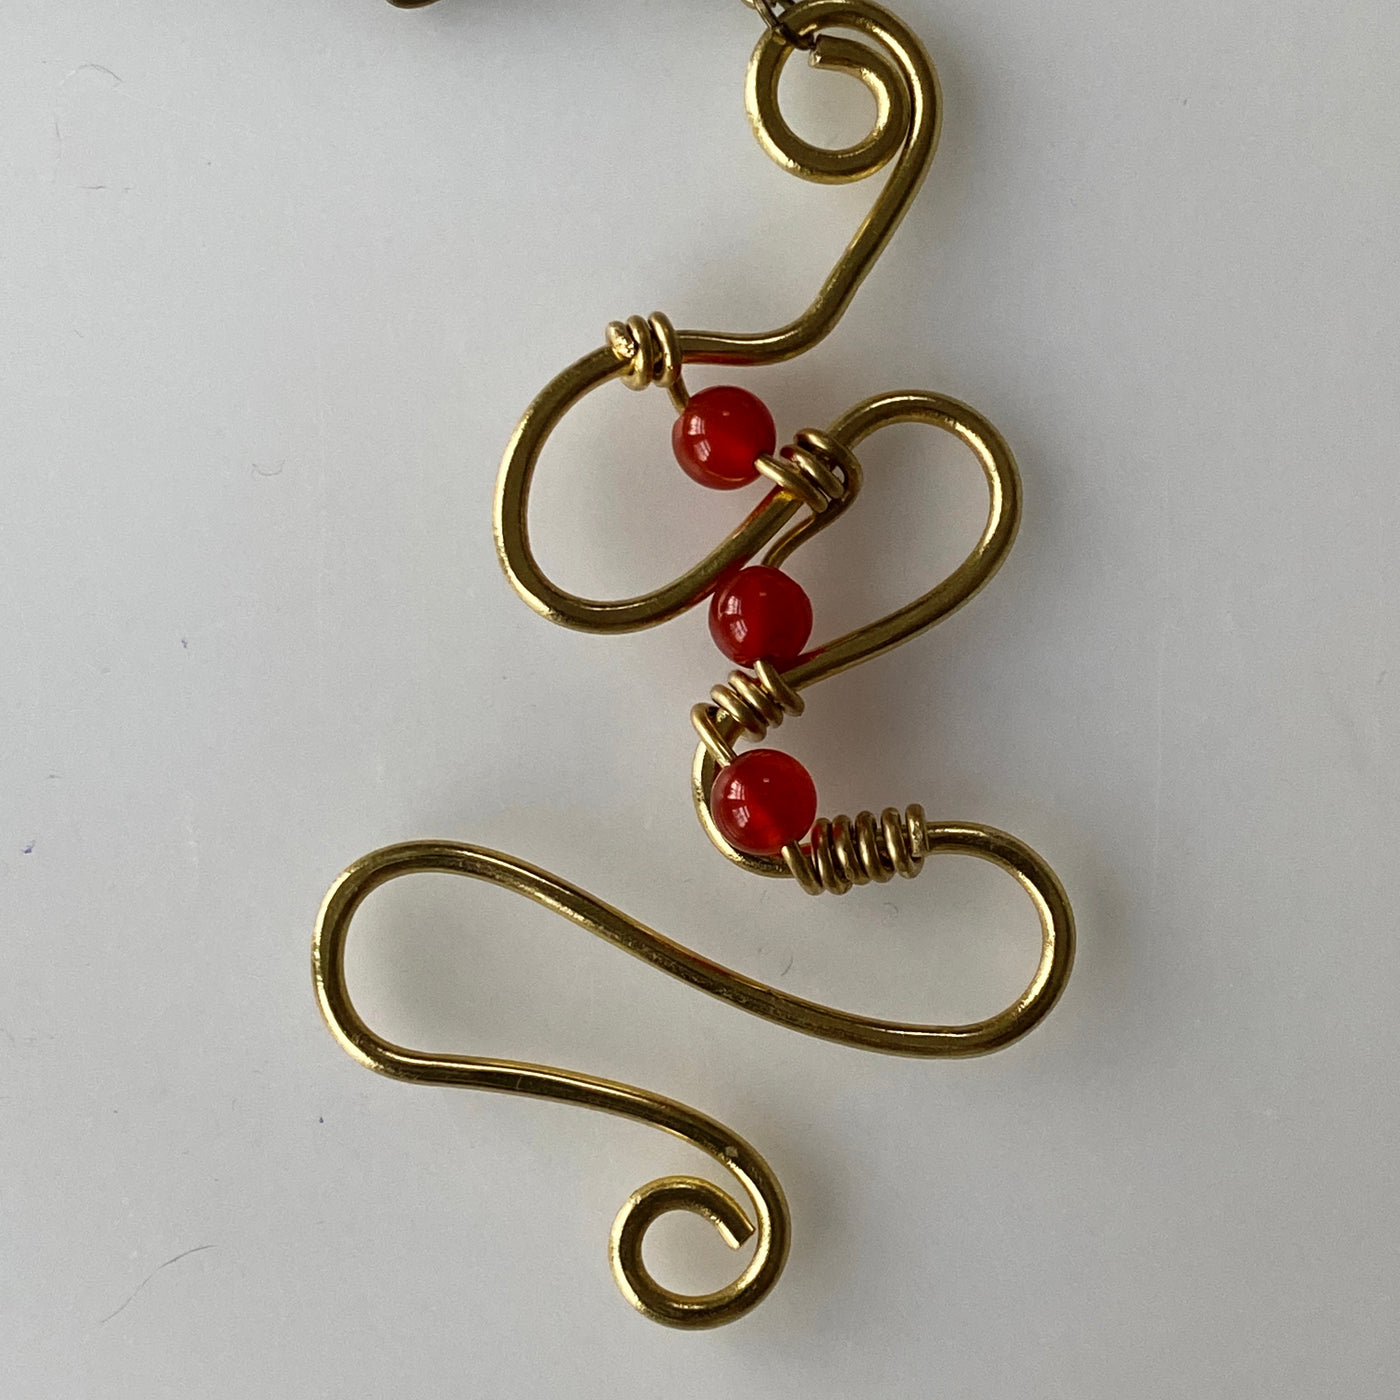 Medium size pendant in brass and red agate on chain. Did you say brass collection.